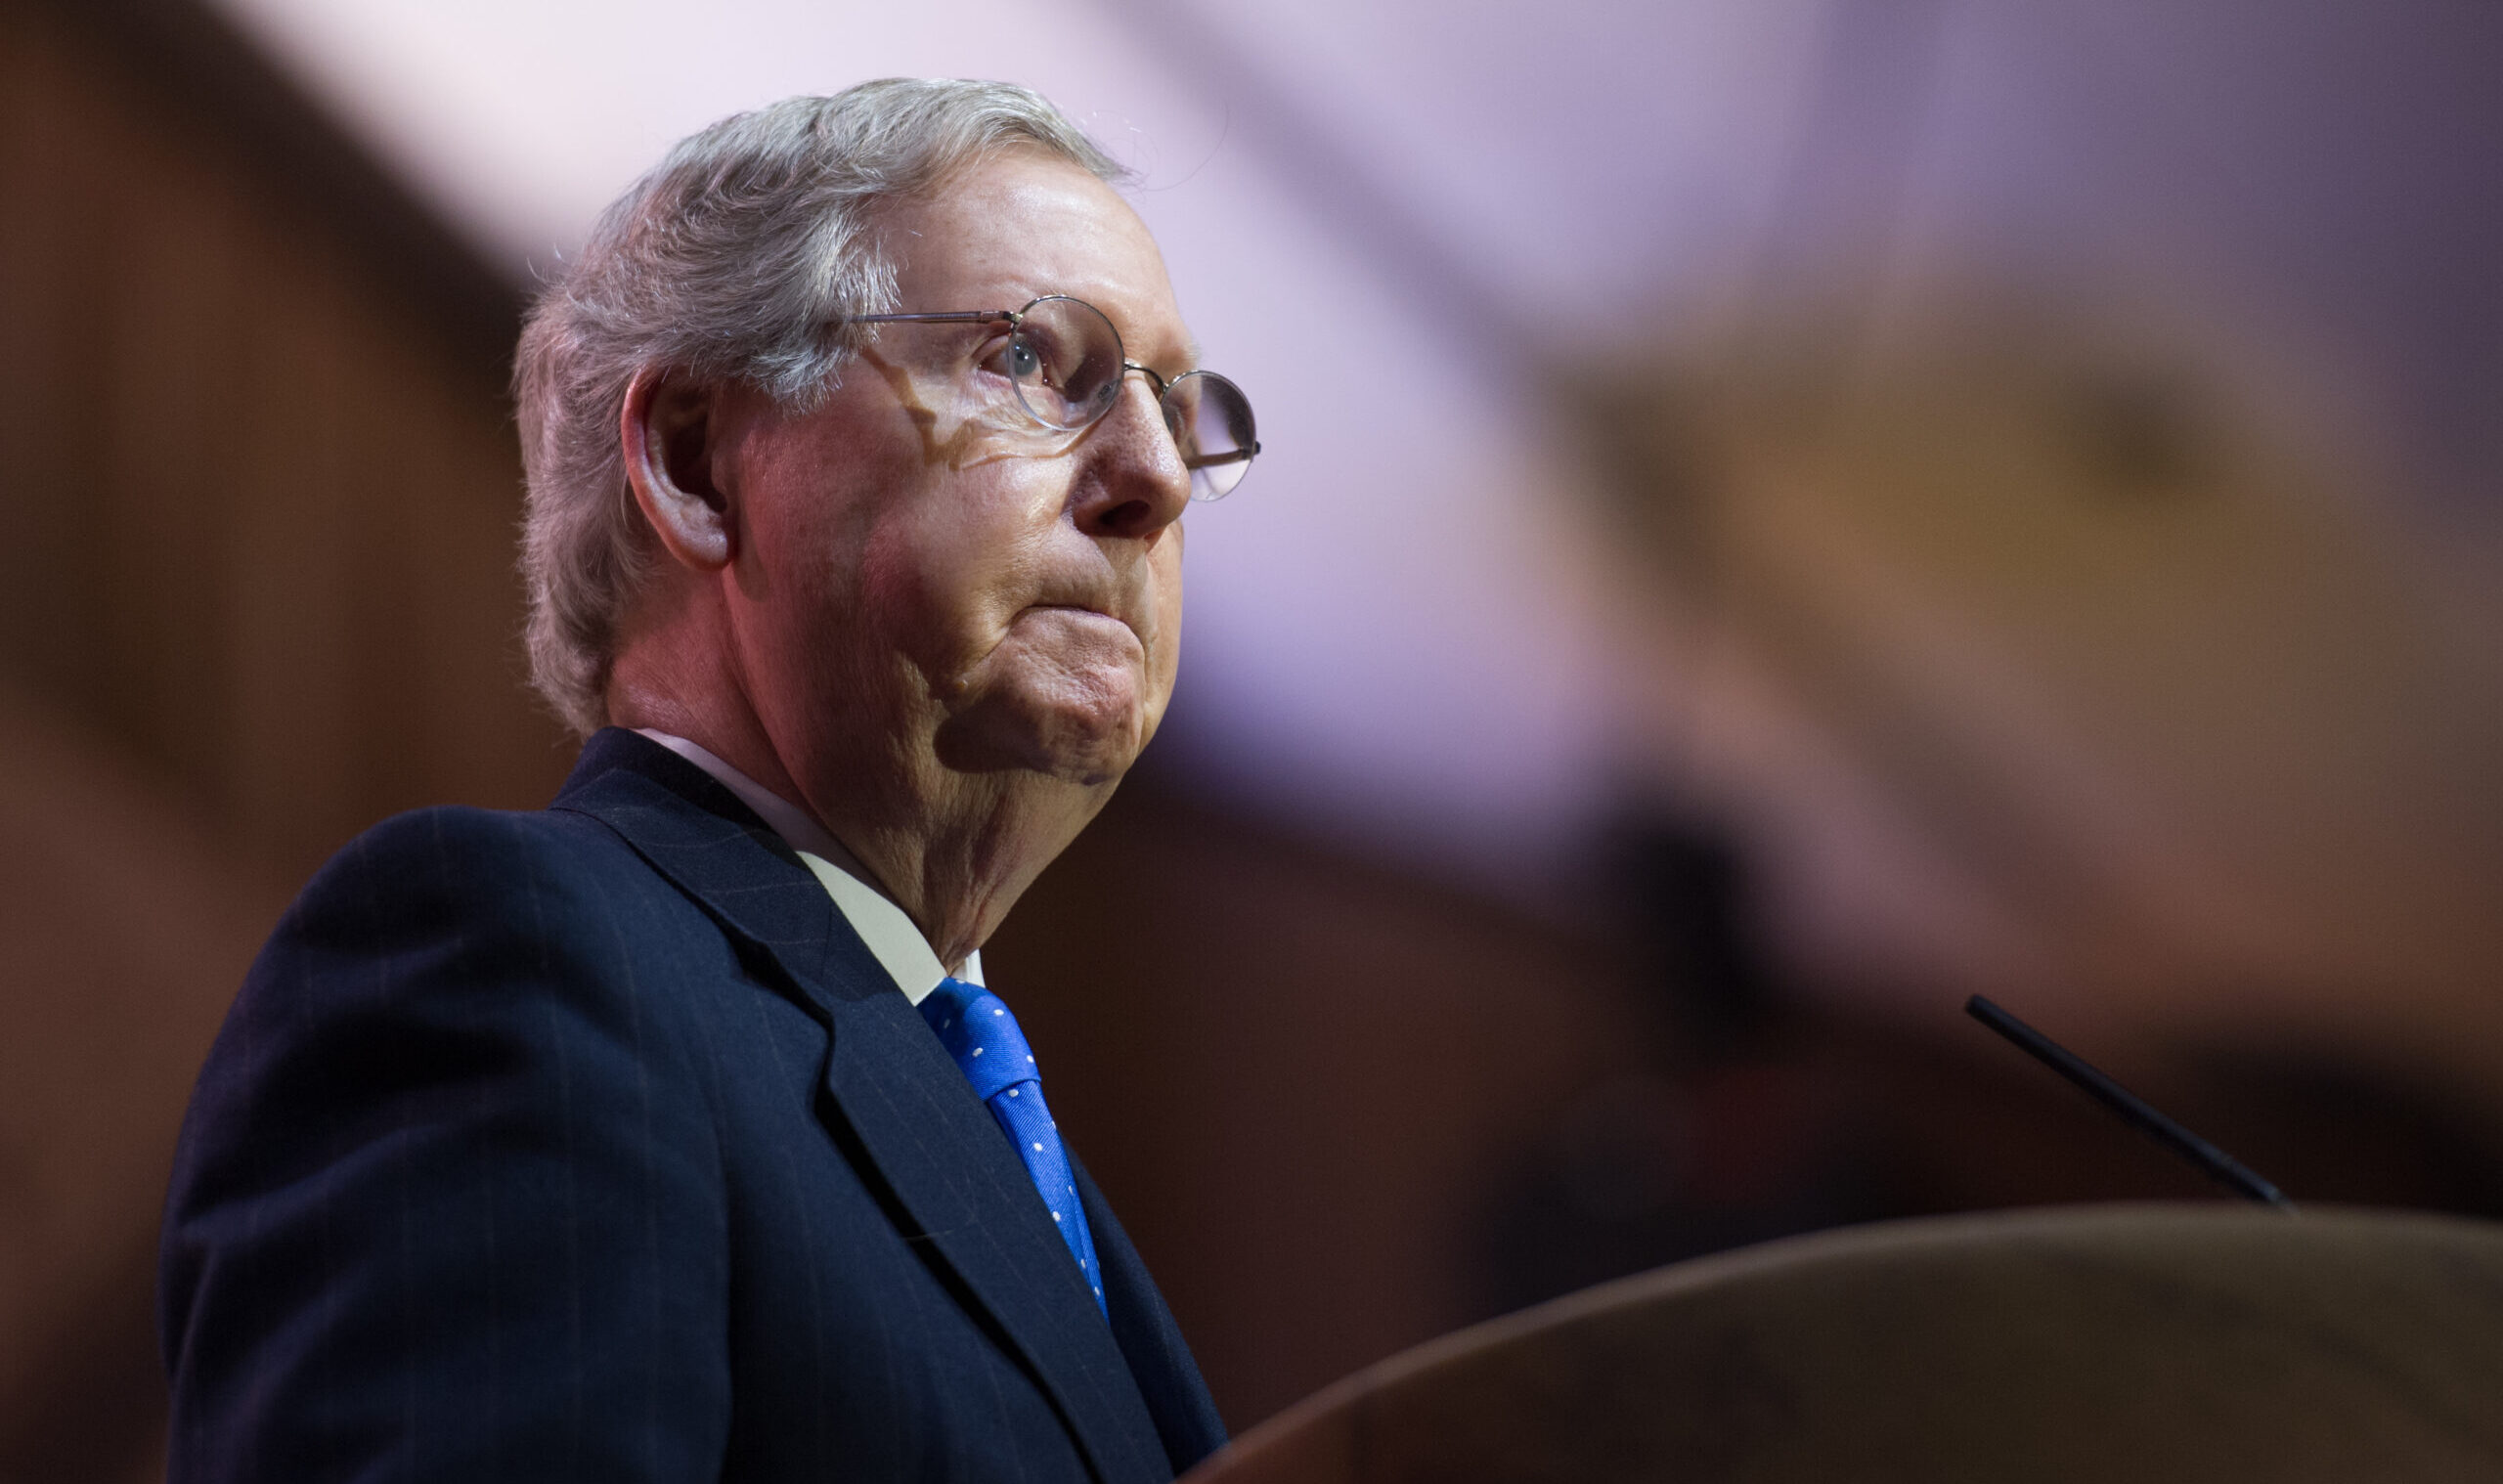 McConnell’s Leadership in Jeopardy After Sending Lankford on a ‘Suicide Mission’ in Border Negotiations